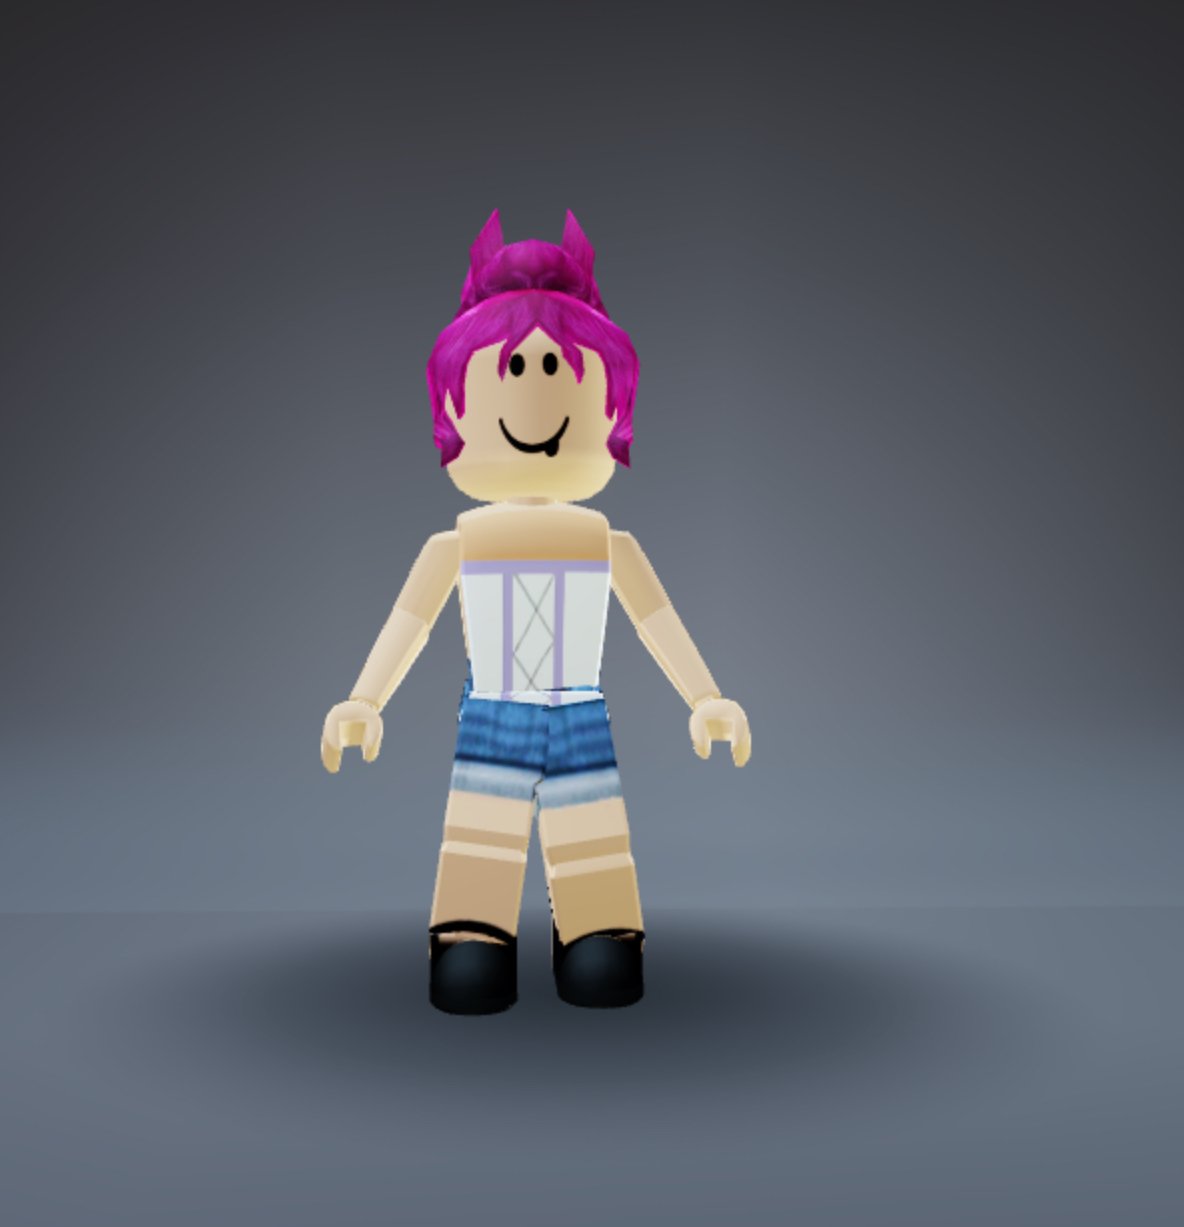 Www Robloxfits Com Roblox Fits - cute outfit ideas for roblox